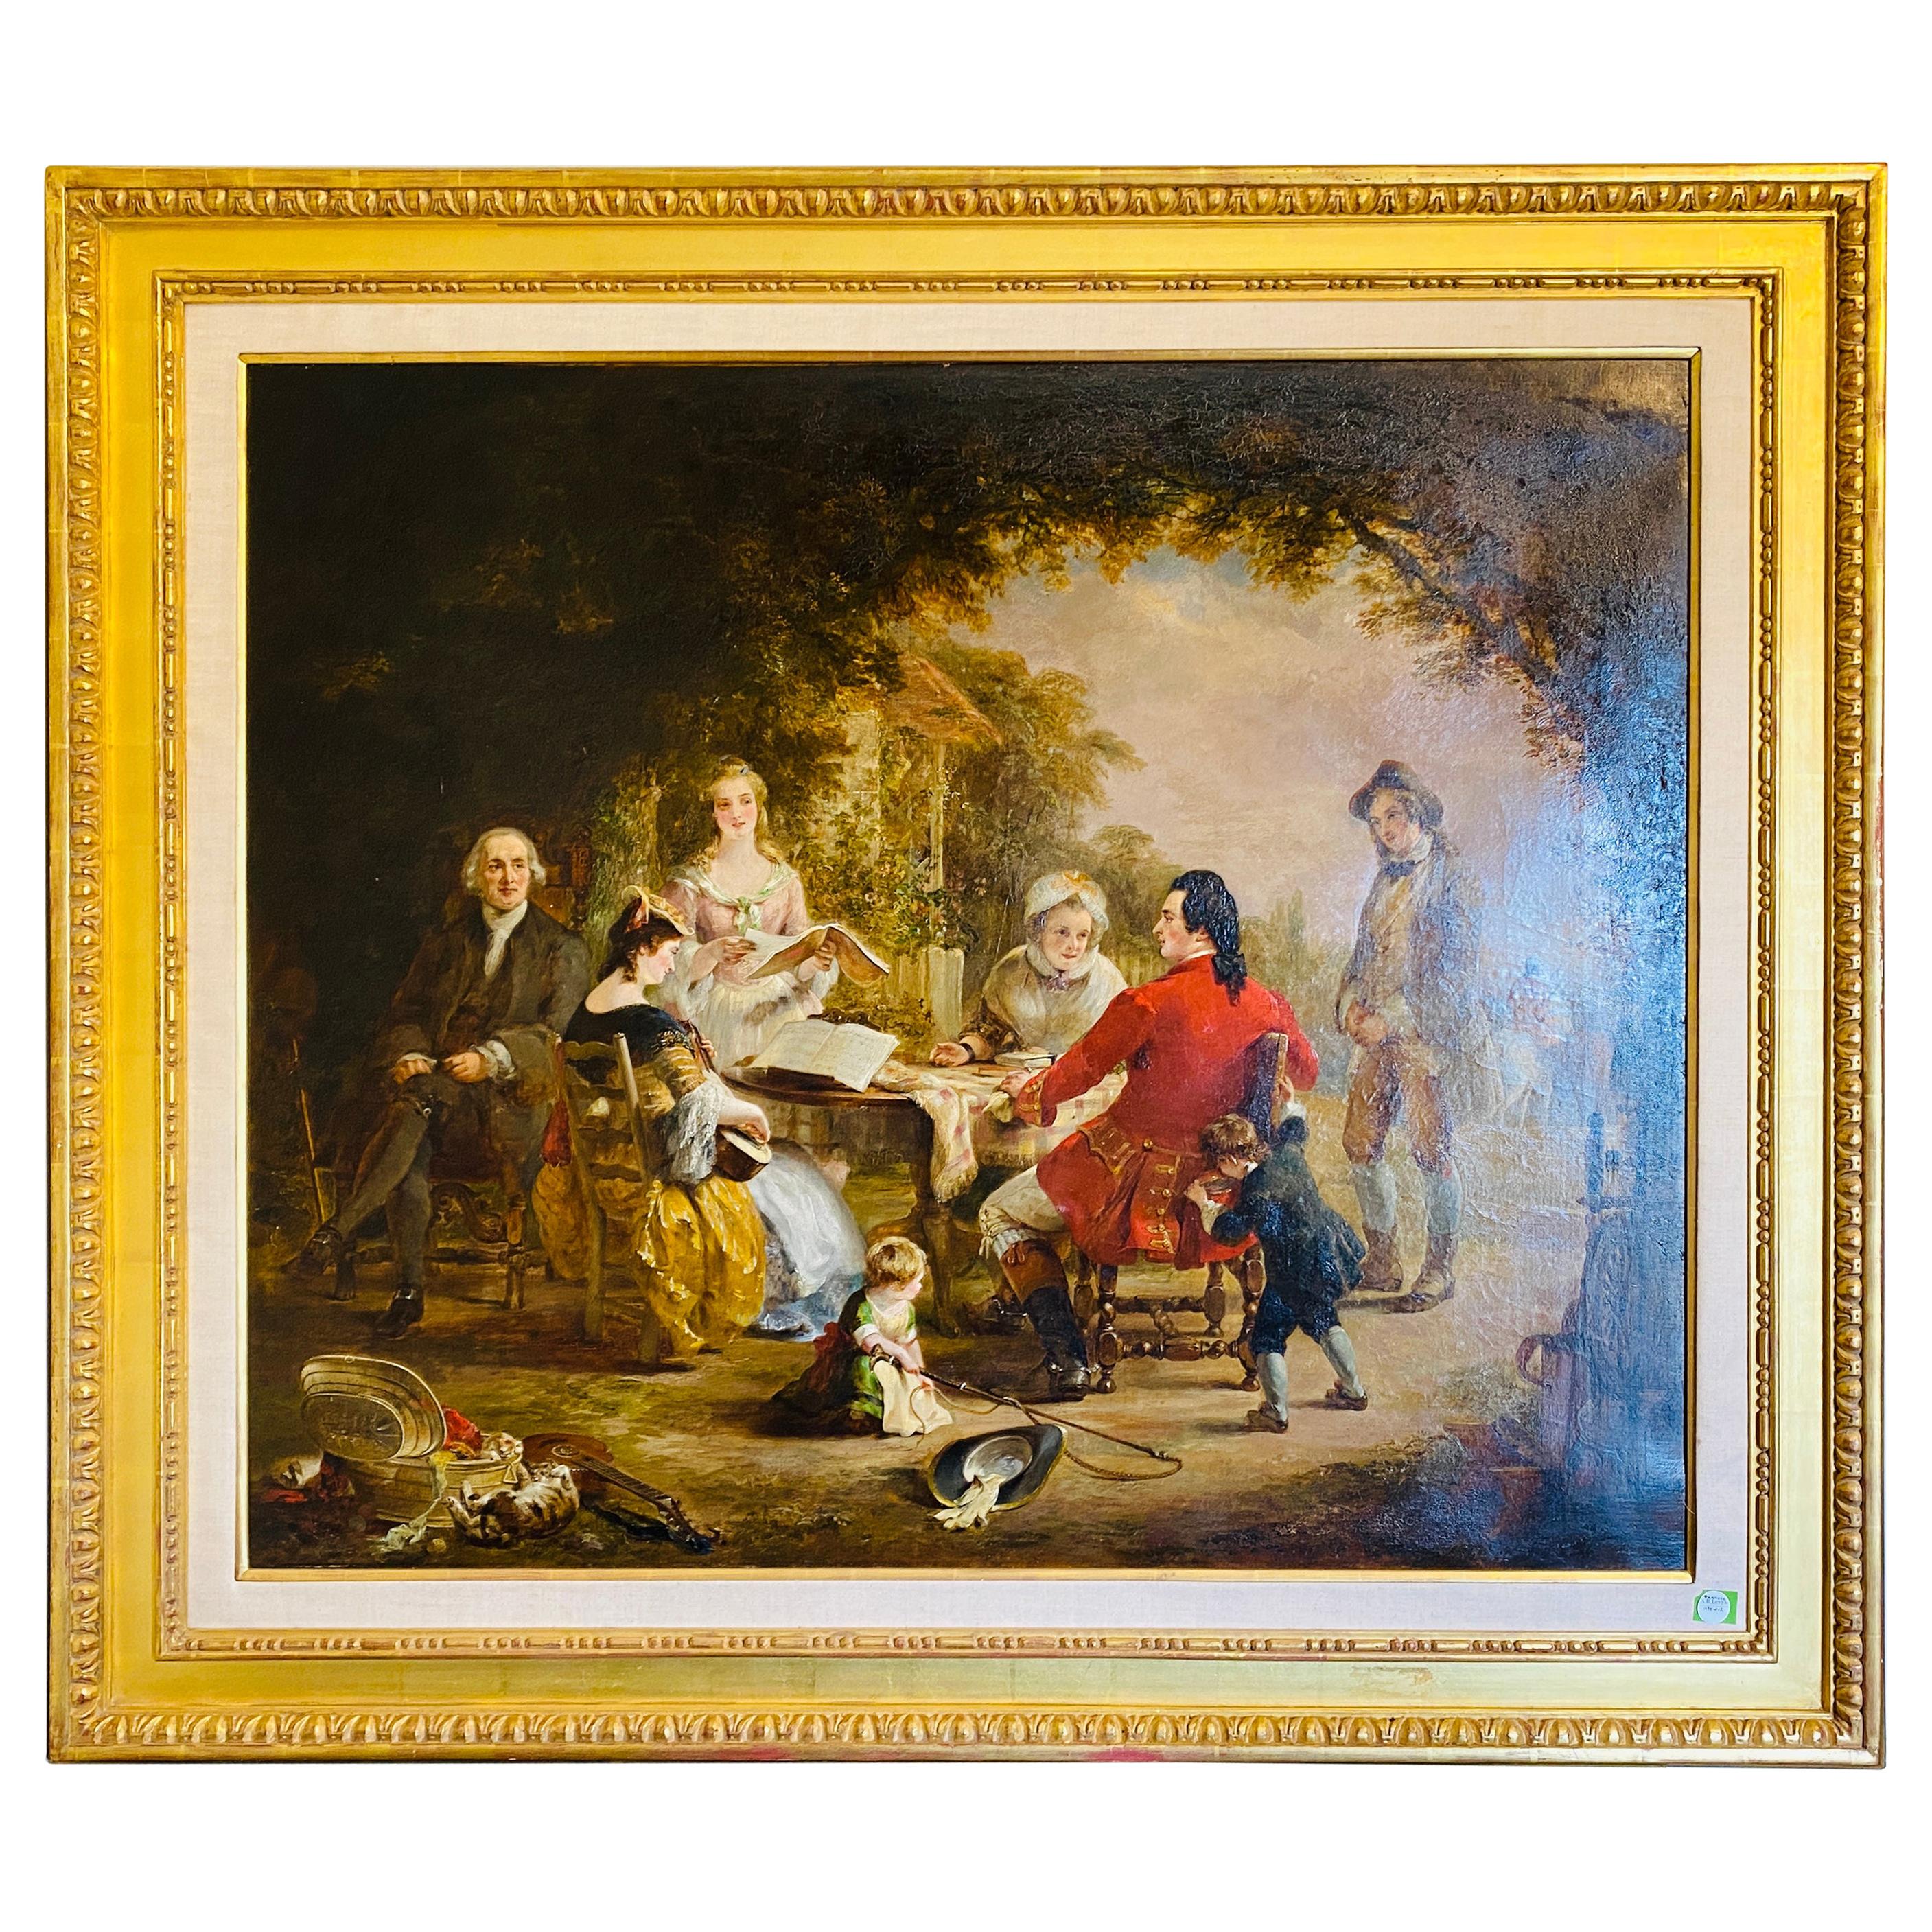 English School '19th Century' Signed J. NOBLE l/r. For Sale